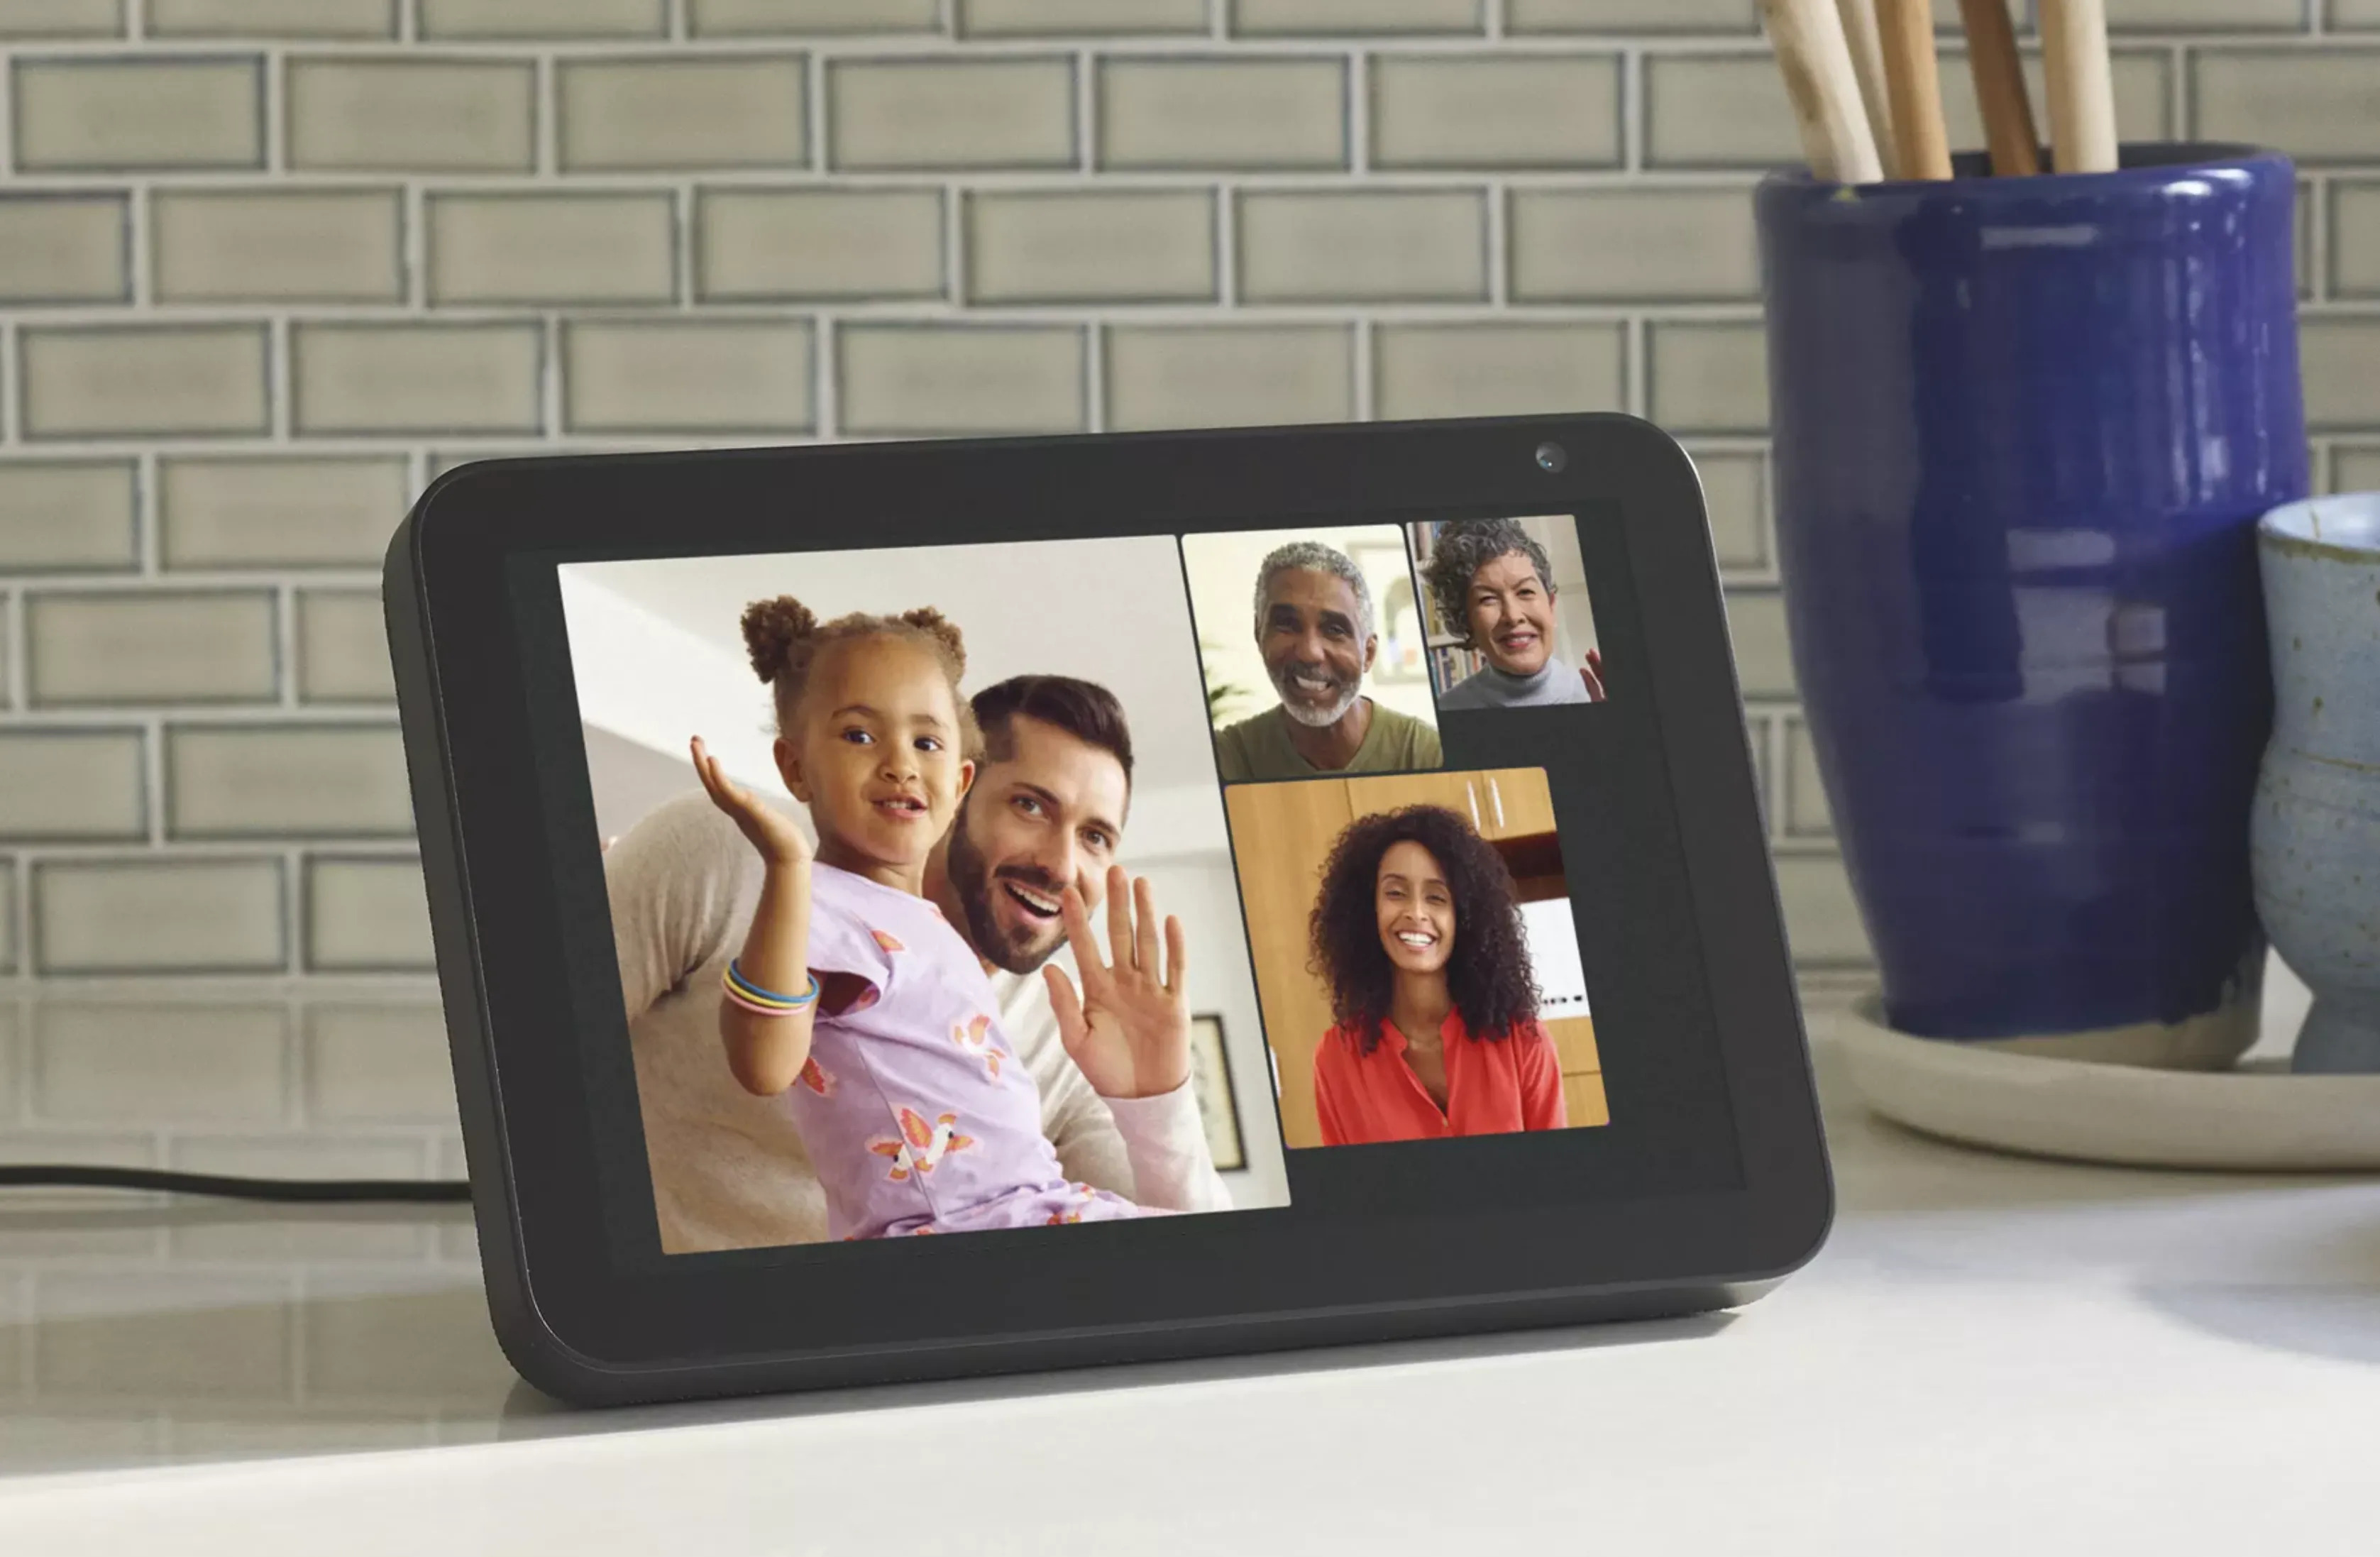 How To Make A Group Call On An Amazon Echo/Echo Show